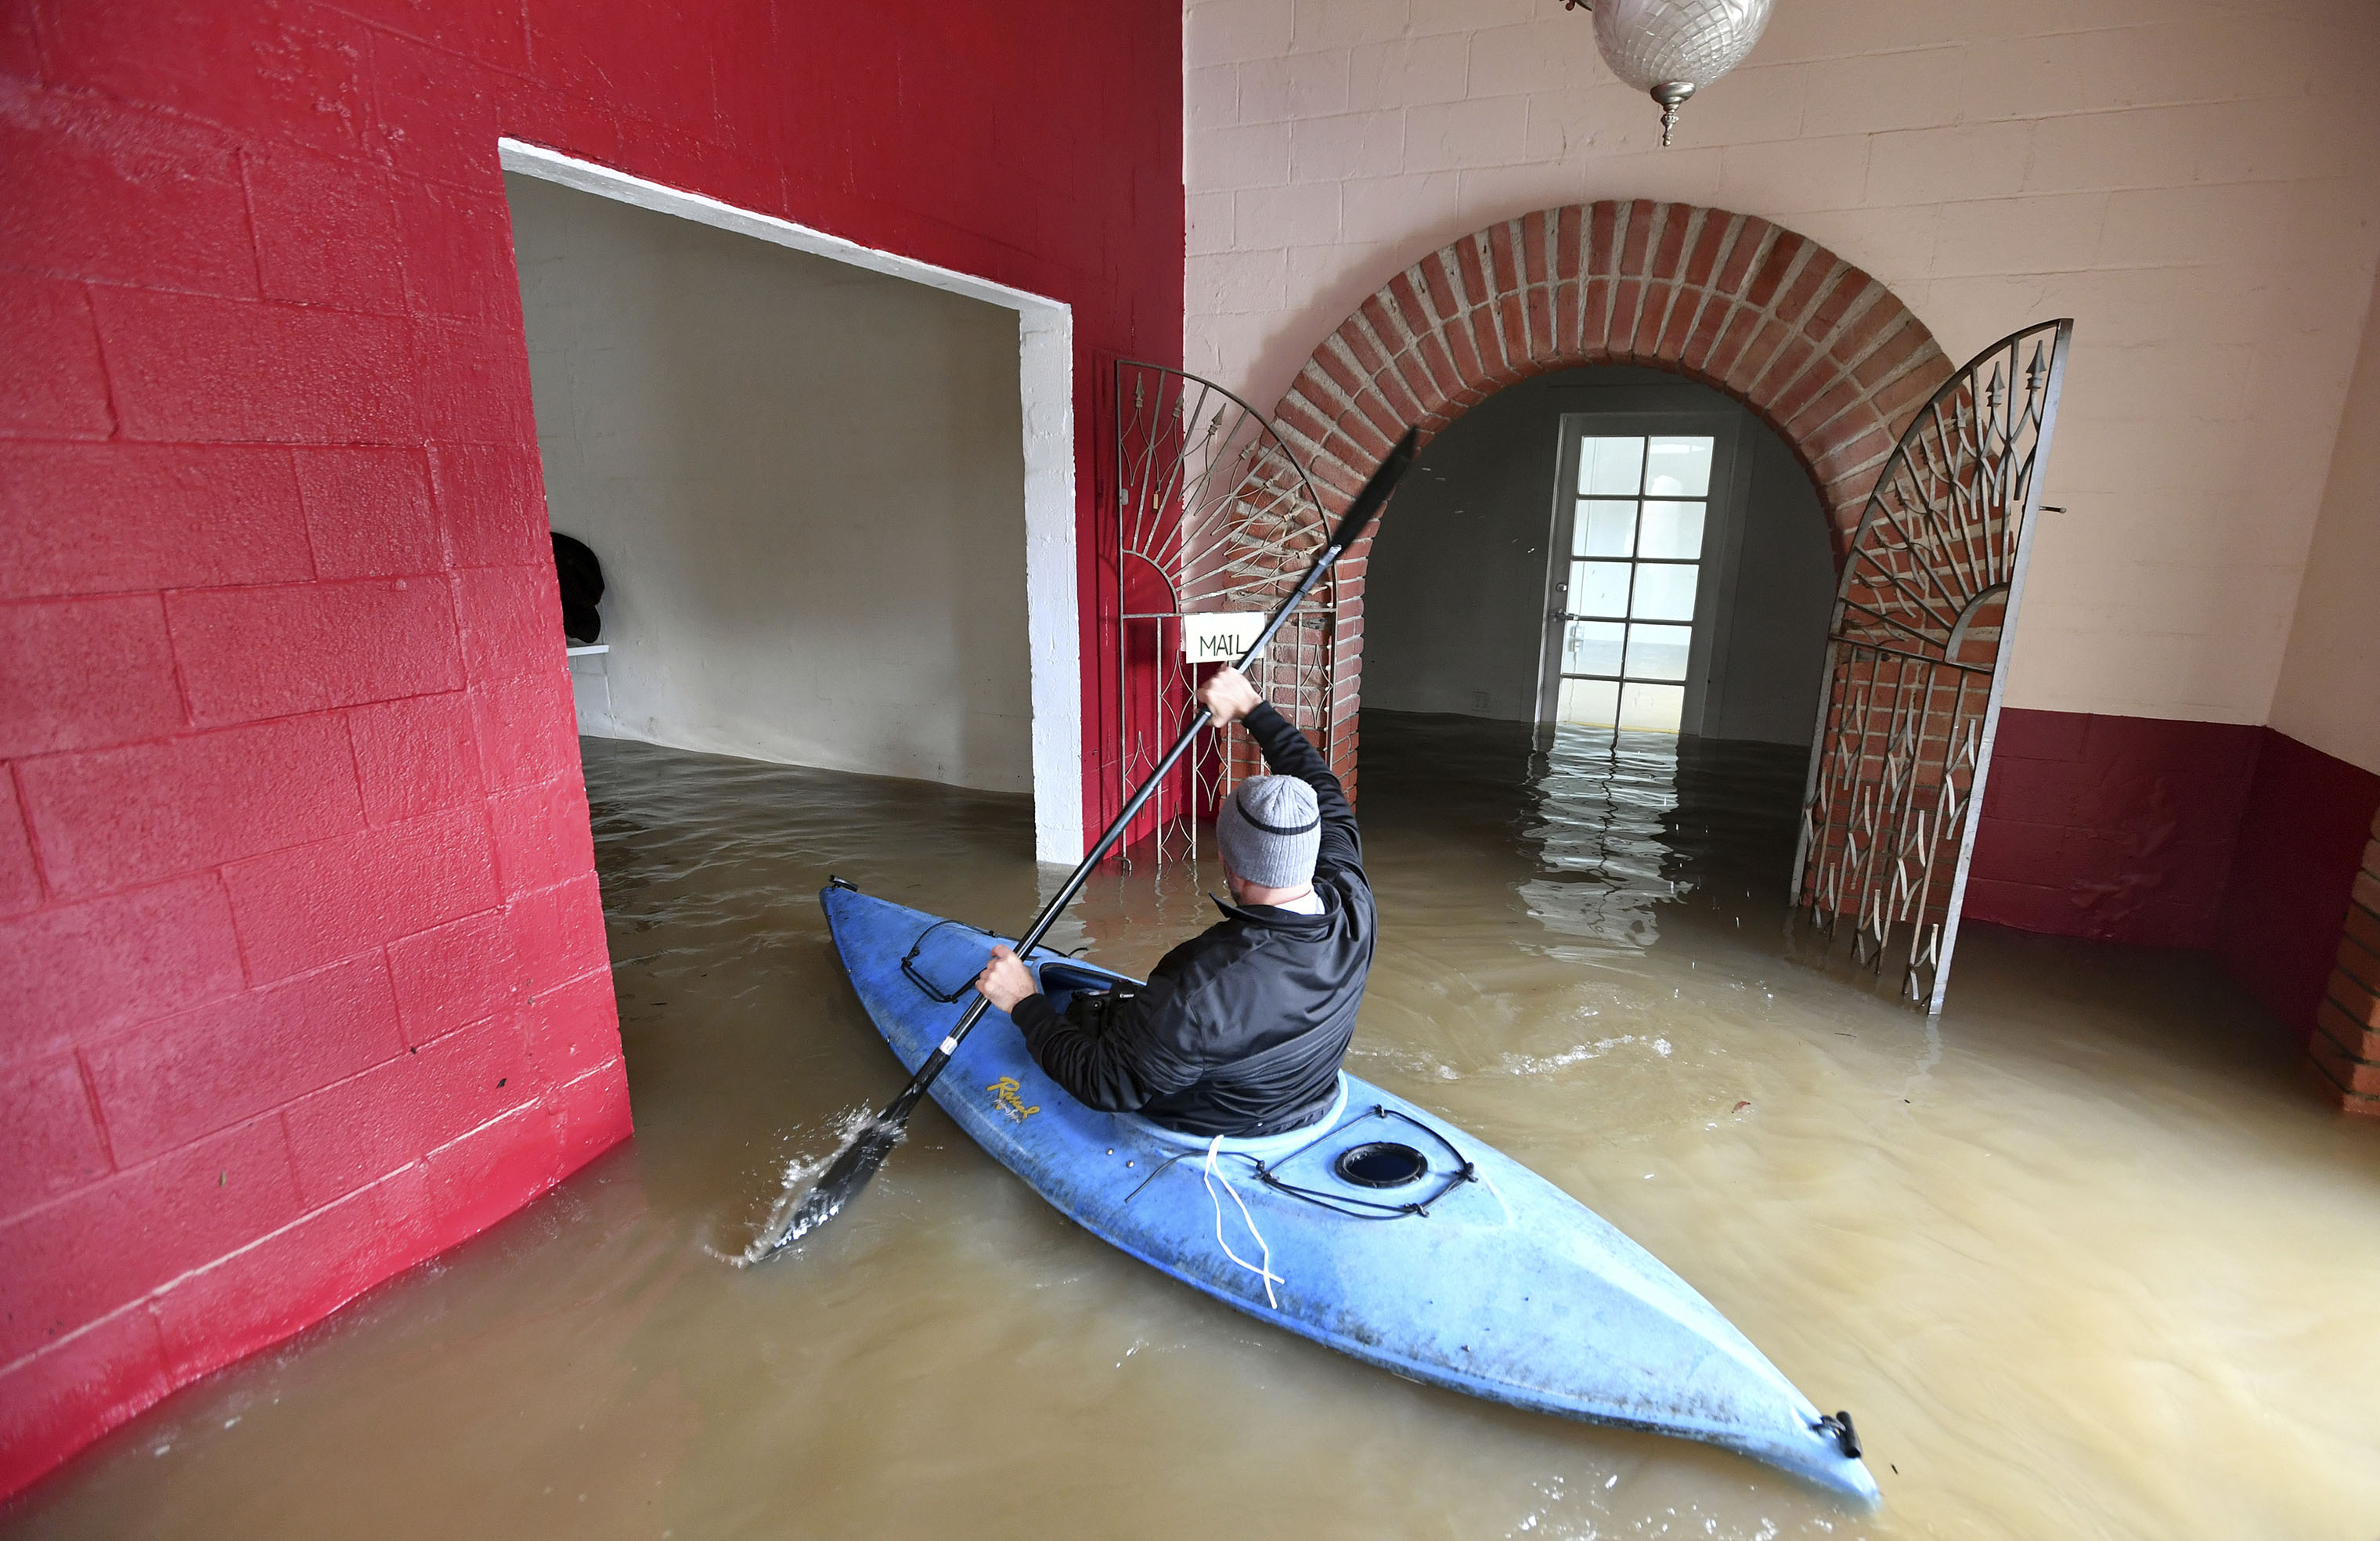 Jay Michael Tucker kayaks through the flooded Surrey Resort as the Russian River flows through it in Guerneville, Calif., on Feb. 15, 2019. (Josh Edelson—AP)